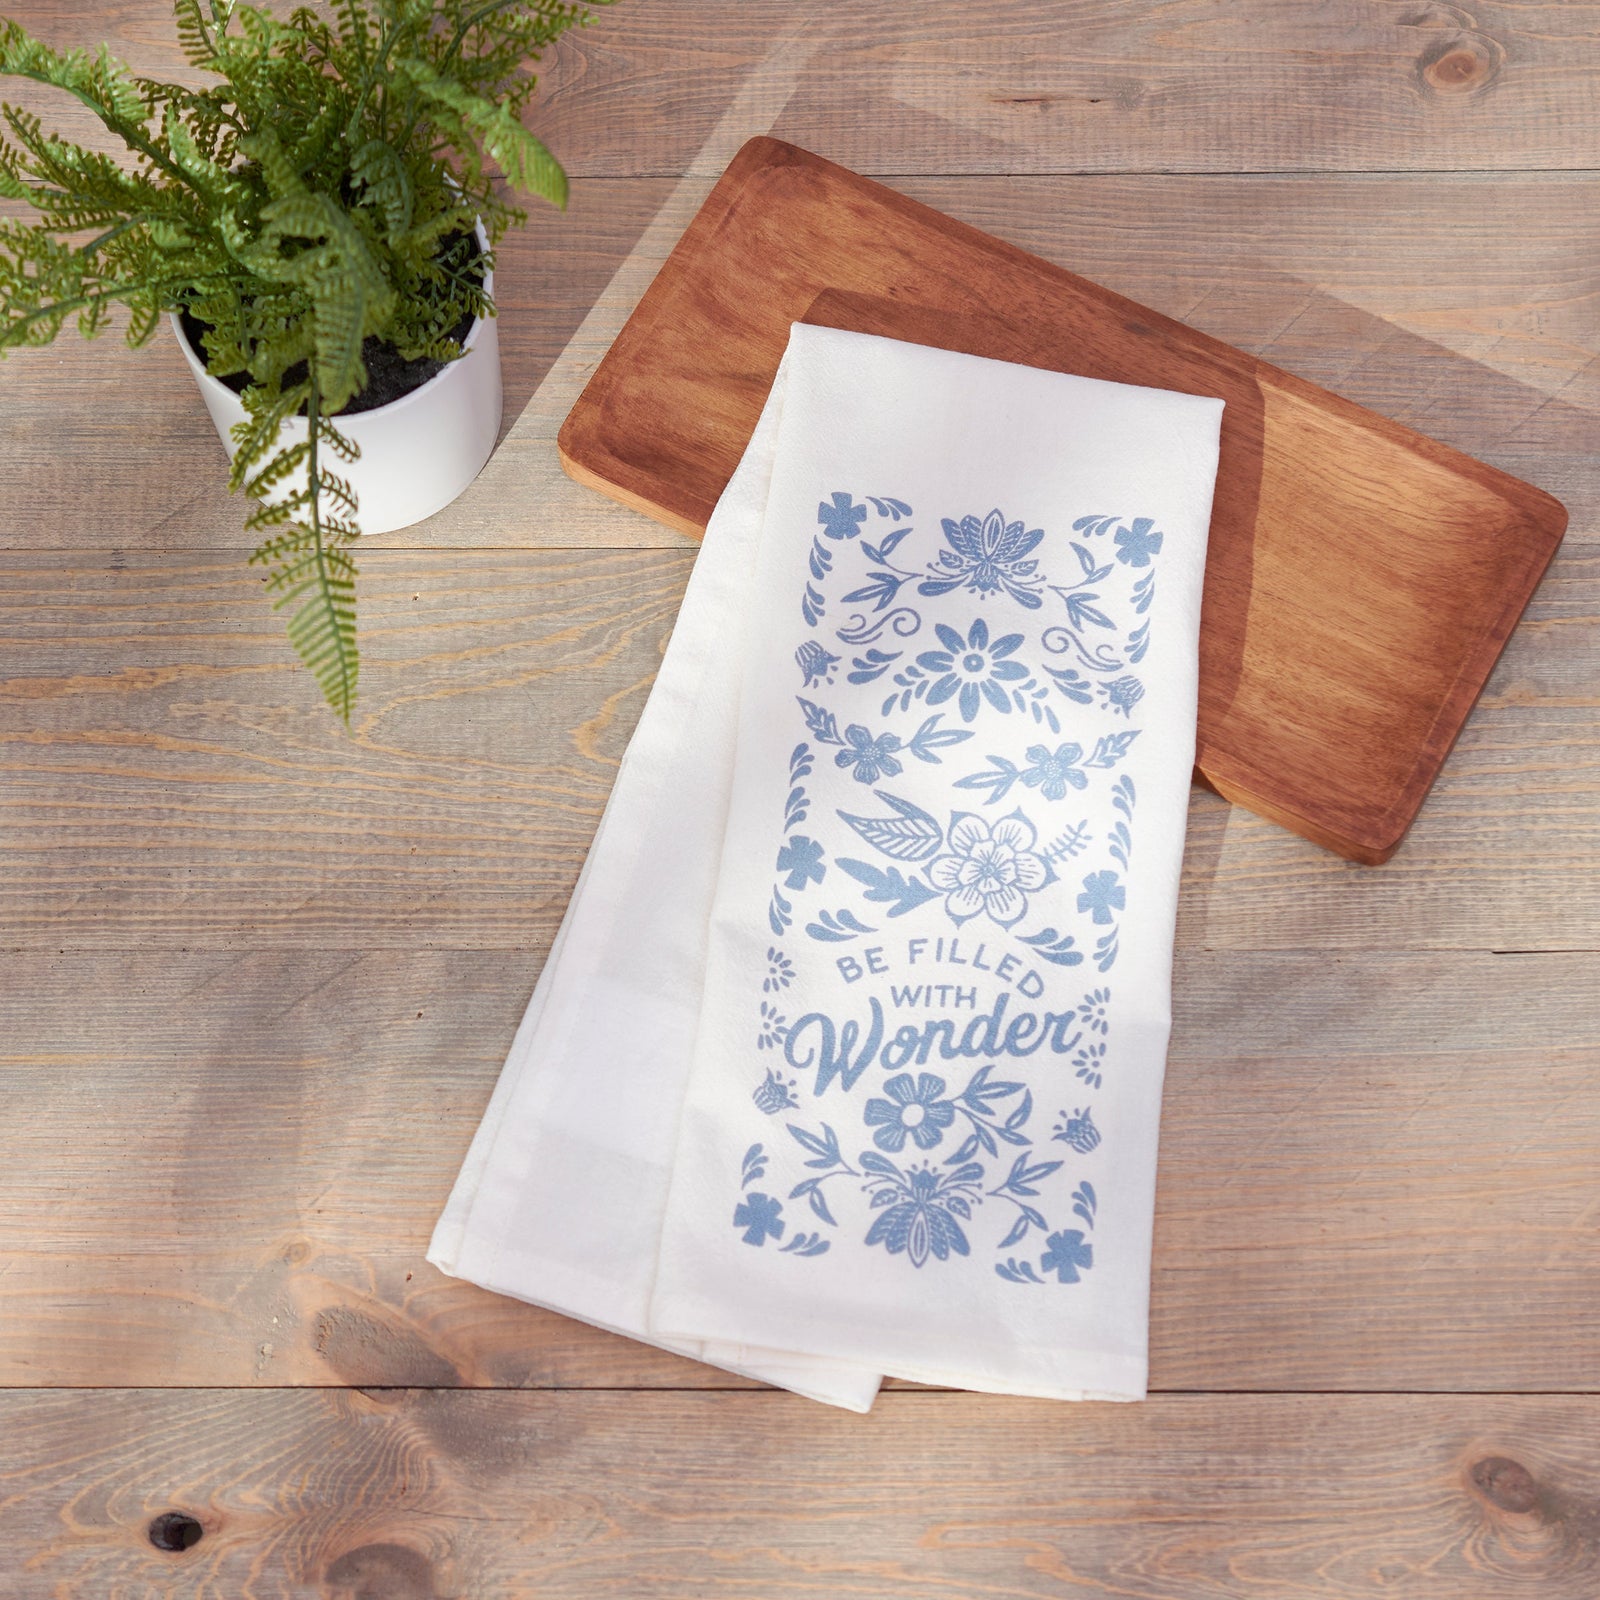 Scandi Style Folk Art "Be Filled With Wonder" Hand Illustrated Kitchen Towel | Hangable, Absorbent 100% Cotton Tea Towel or Dish Cloth